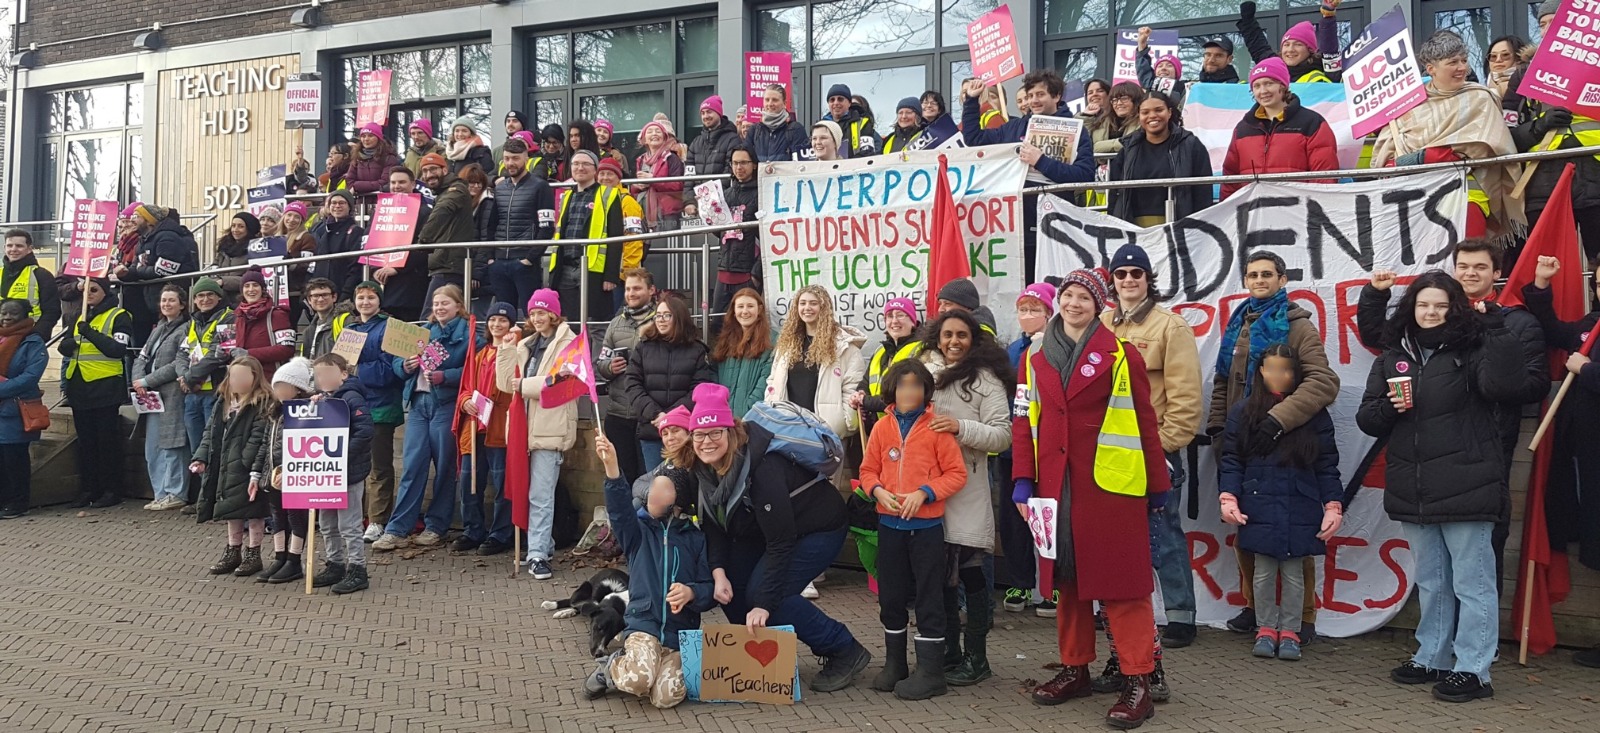 UCU members gather for a photo outside teaching hub 502. There are lots of them! Students hold up a banner reading 'Liverpool students support the UCU strike'.